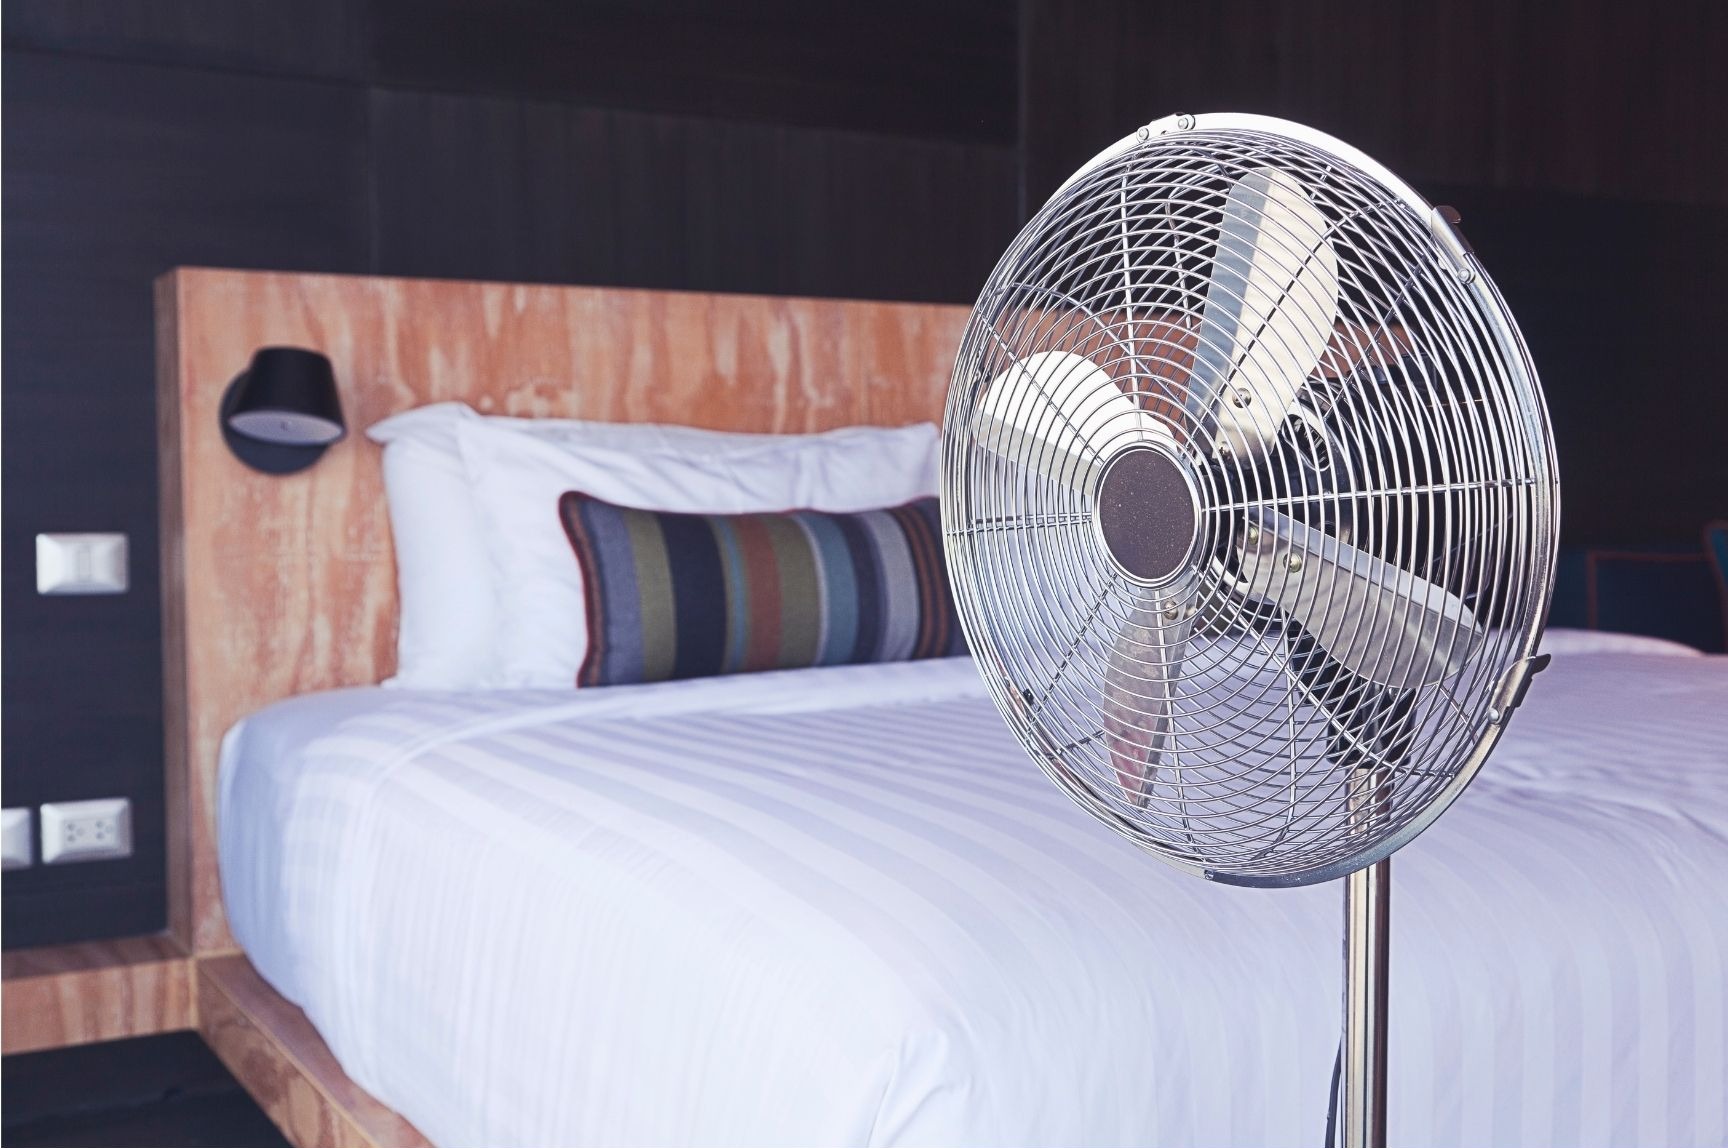 Benefits of sleeping with a fan